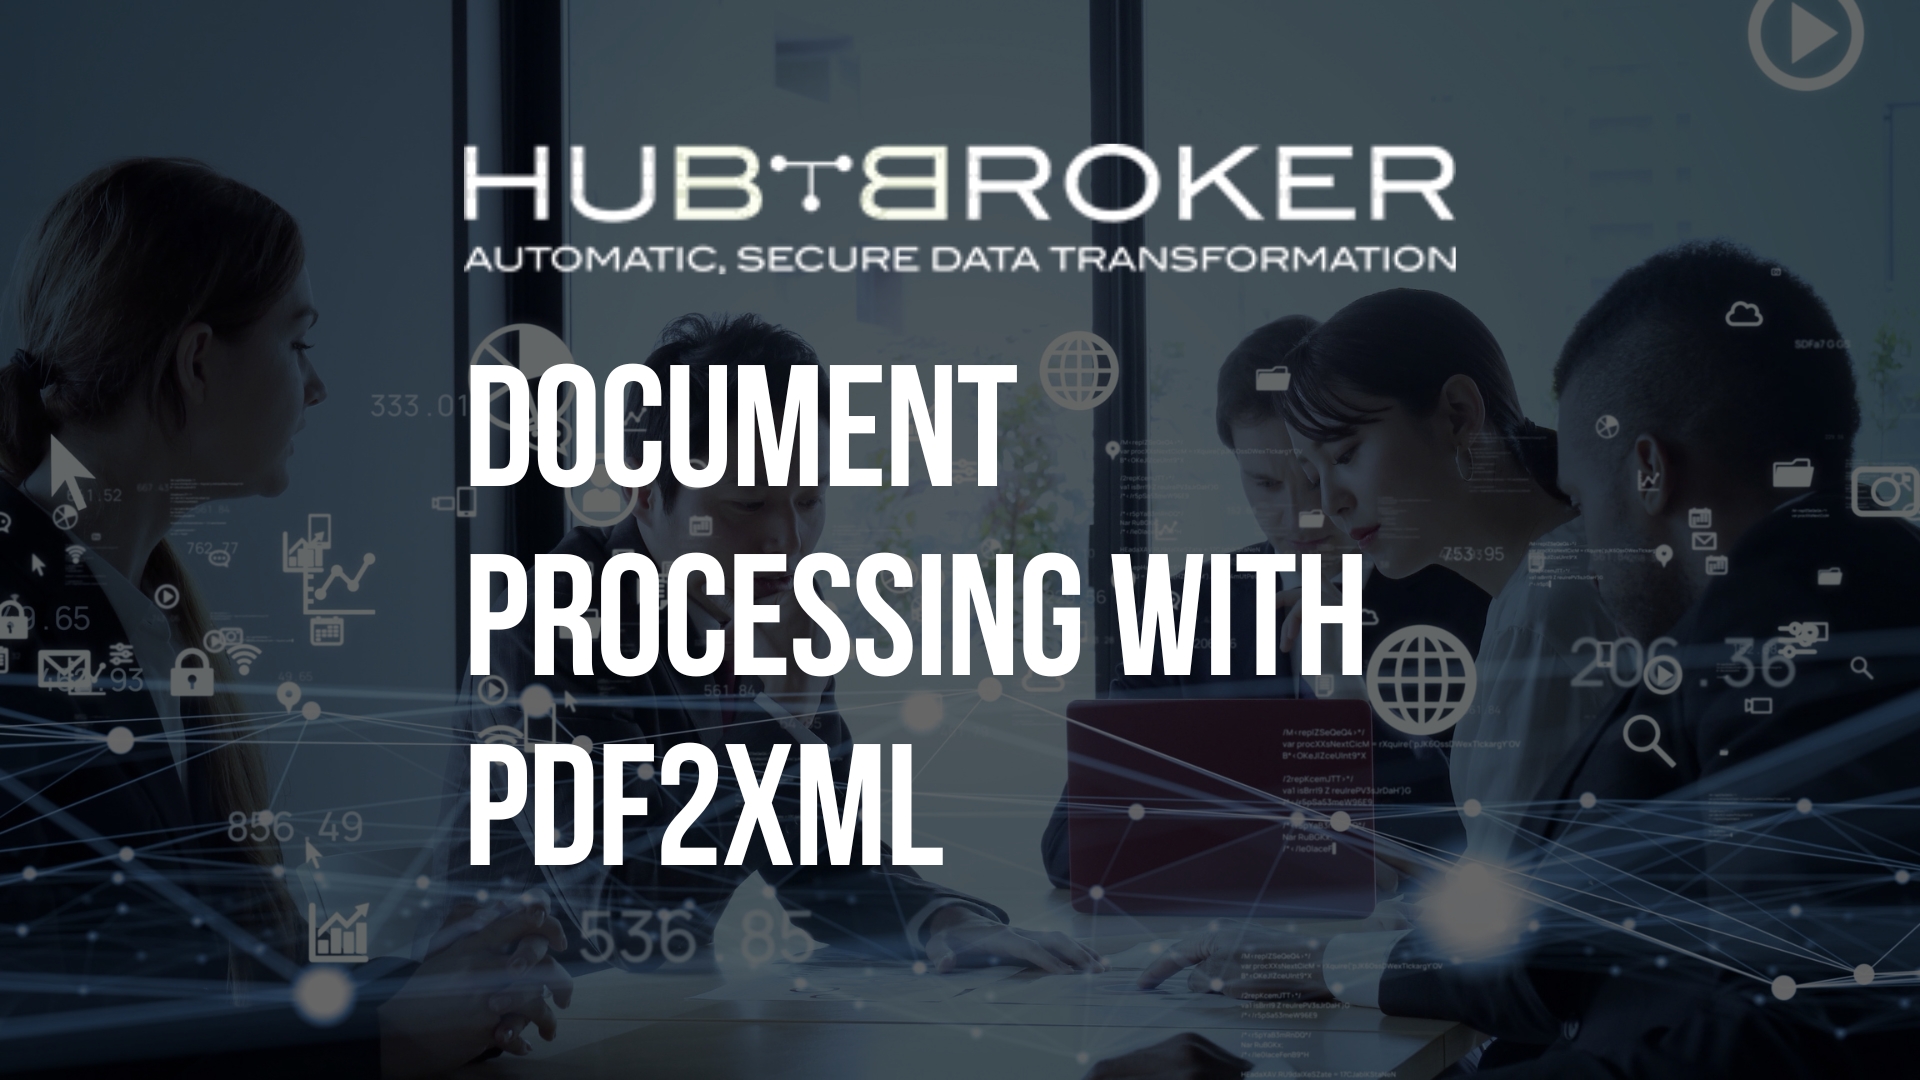 The Future of the Intelligent Document Processing with PDF2XML